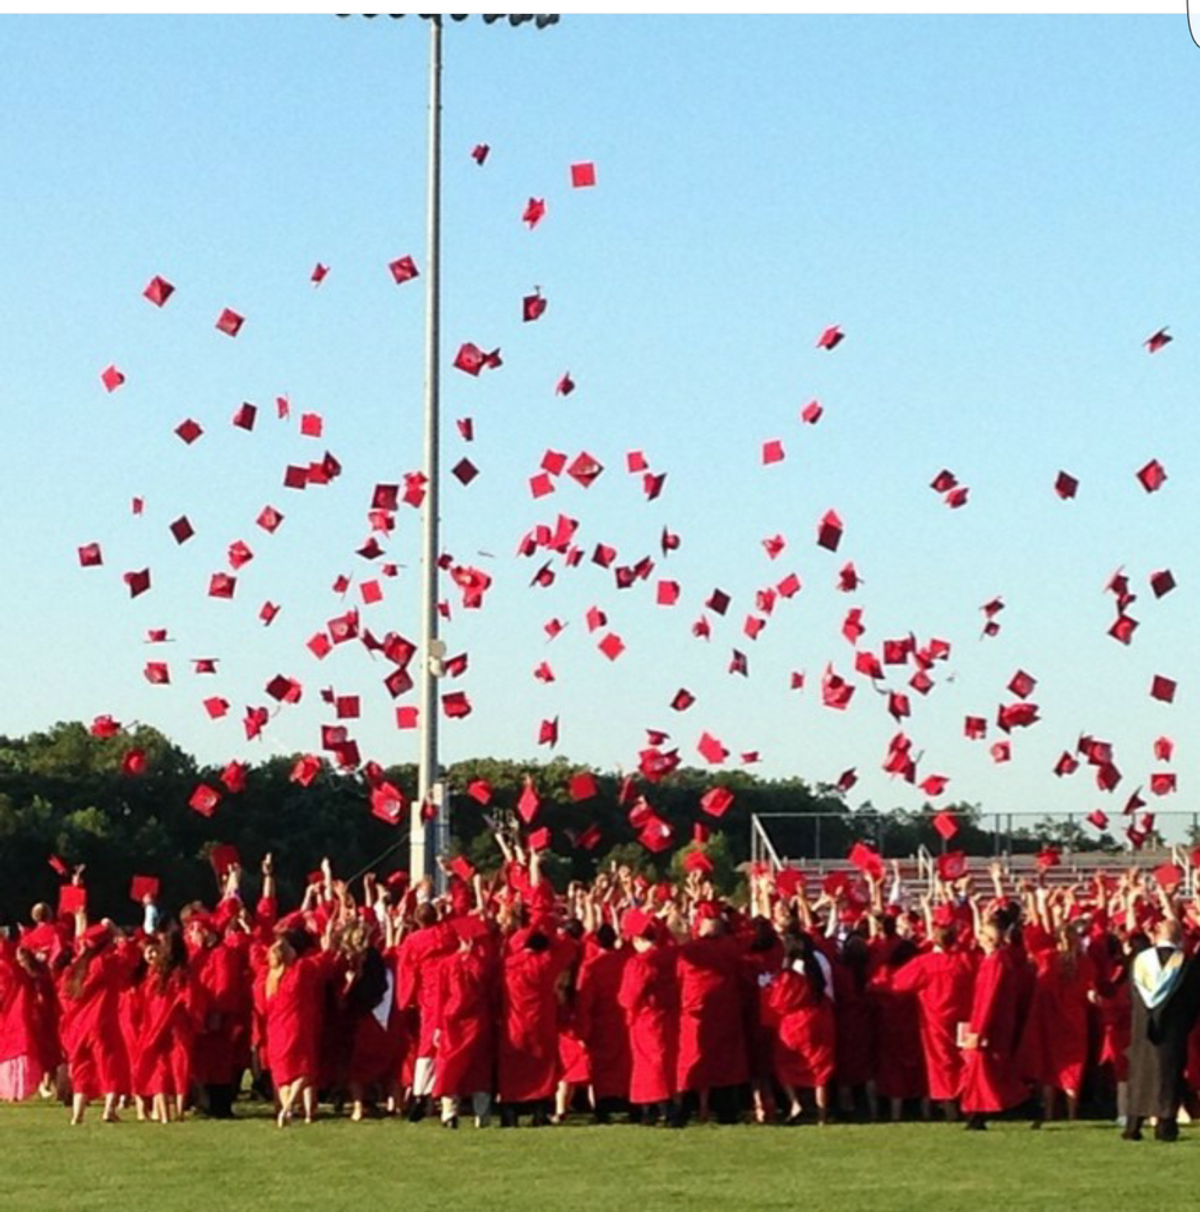 7 Things I Never Thought I'd Miss About High School